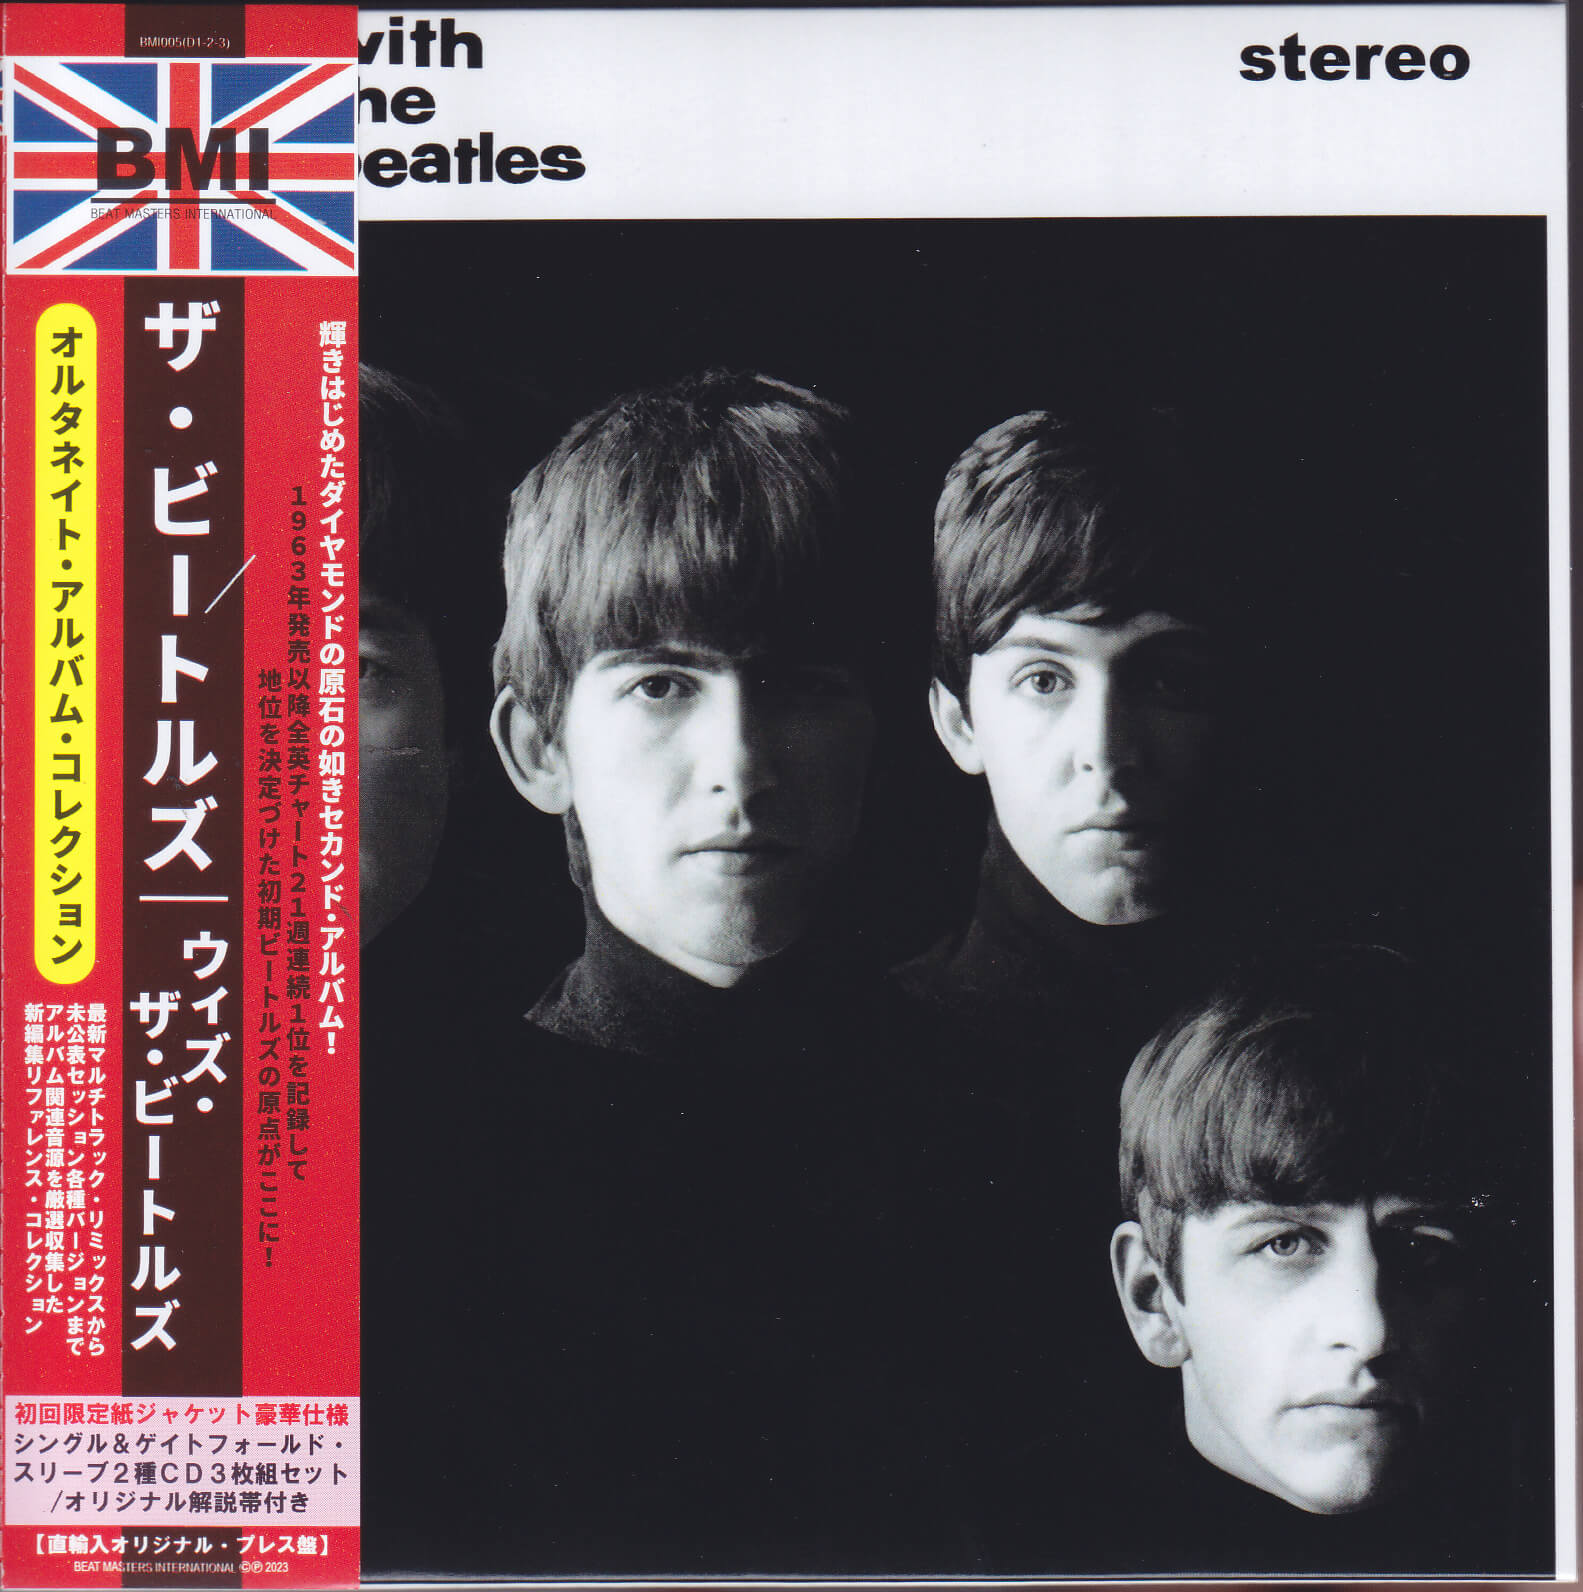 THE BEATLES COLLECTION 14枚セット - レコード